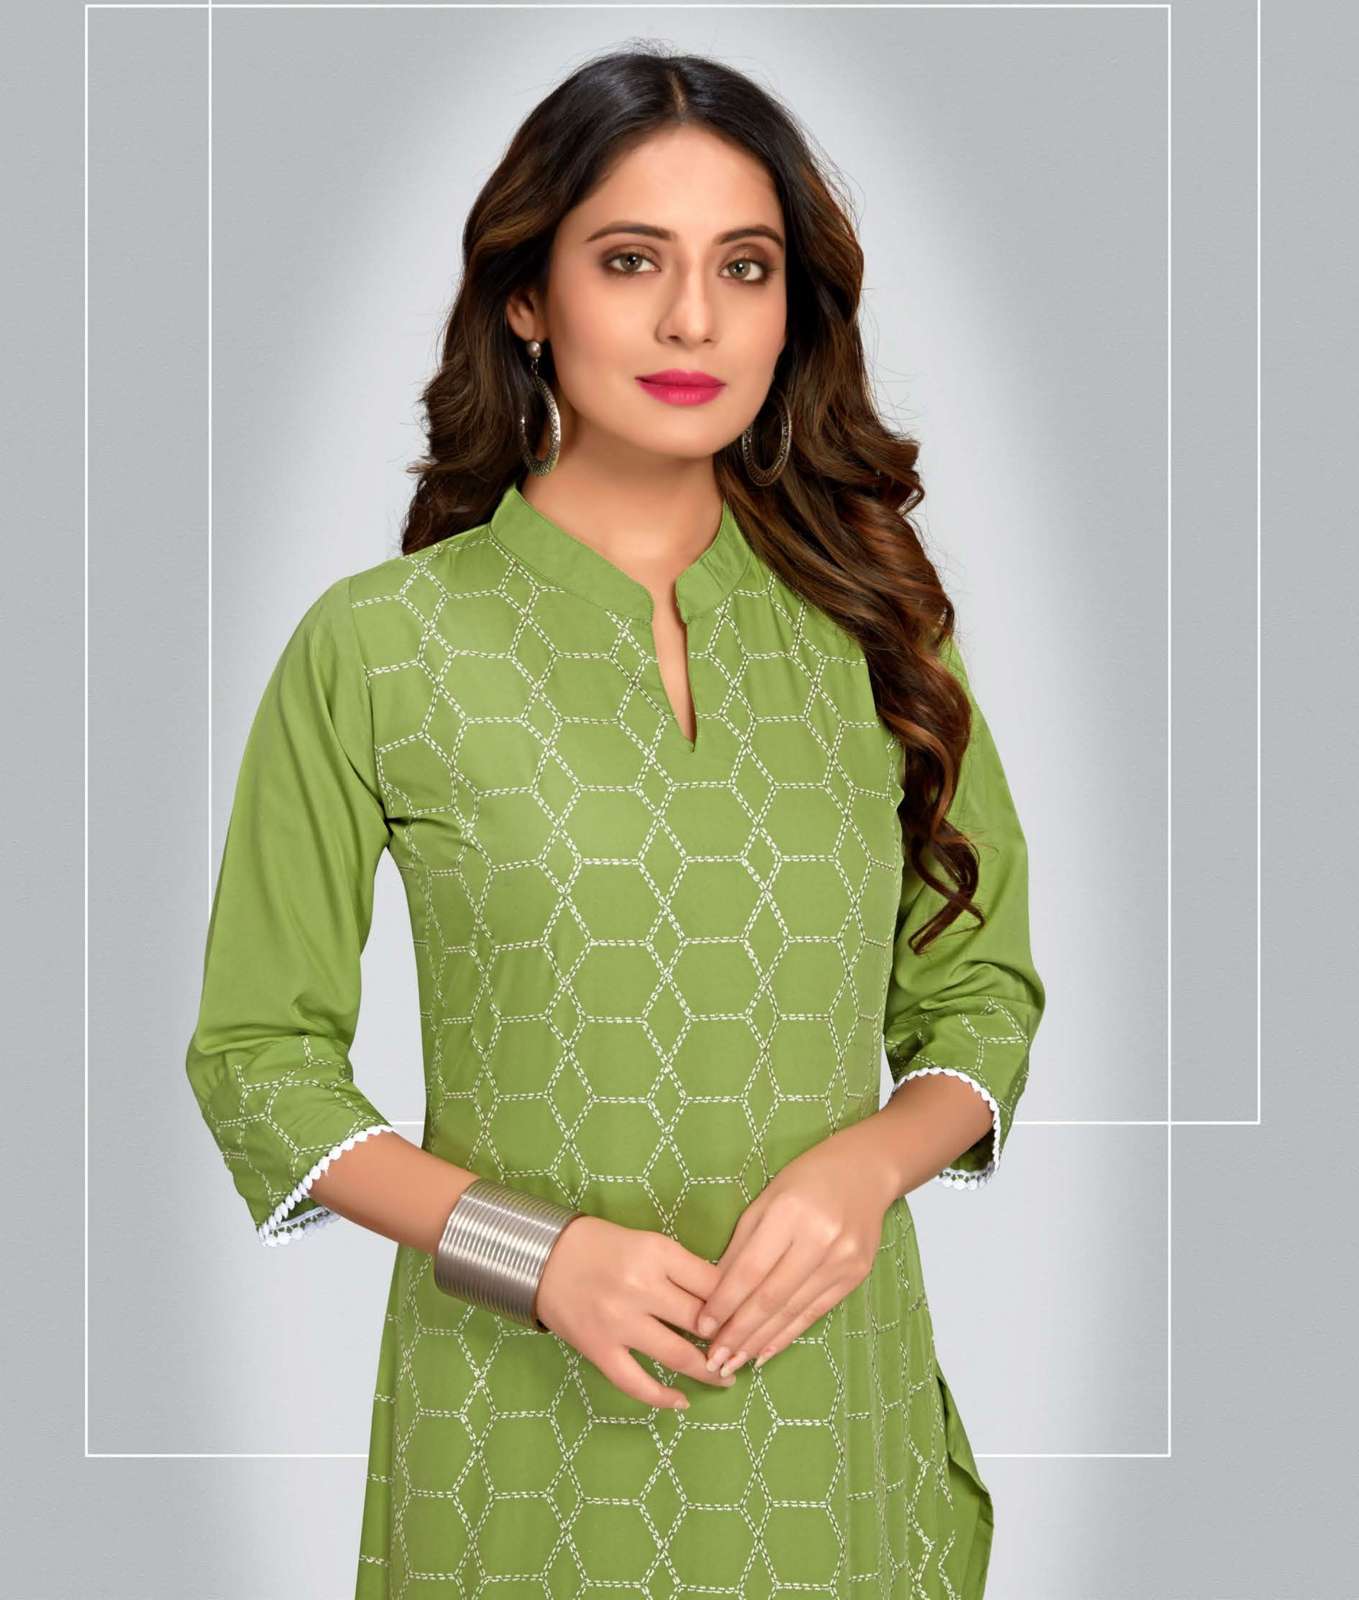 CHANNEL 9 PRESENTS 38SC-41SC SERIES CREPE PRINTED KURTIS CASUAL COLLECTION AT WHOLESALE RATES 7920